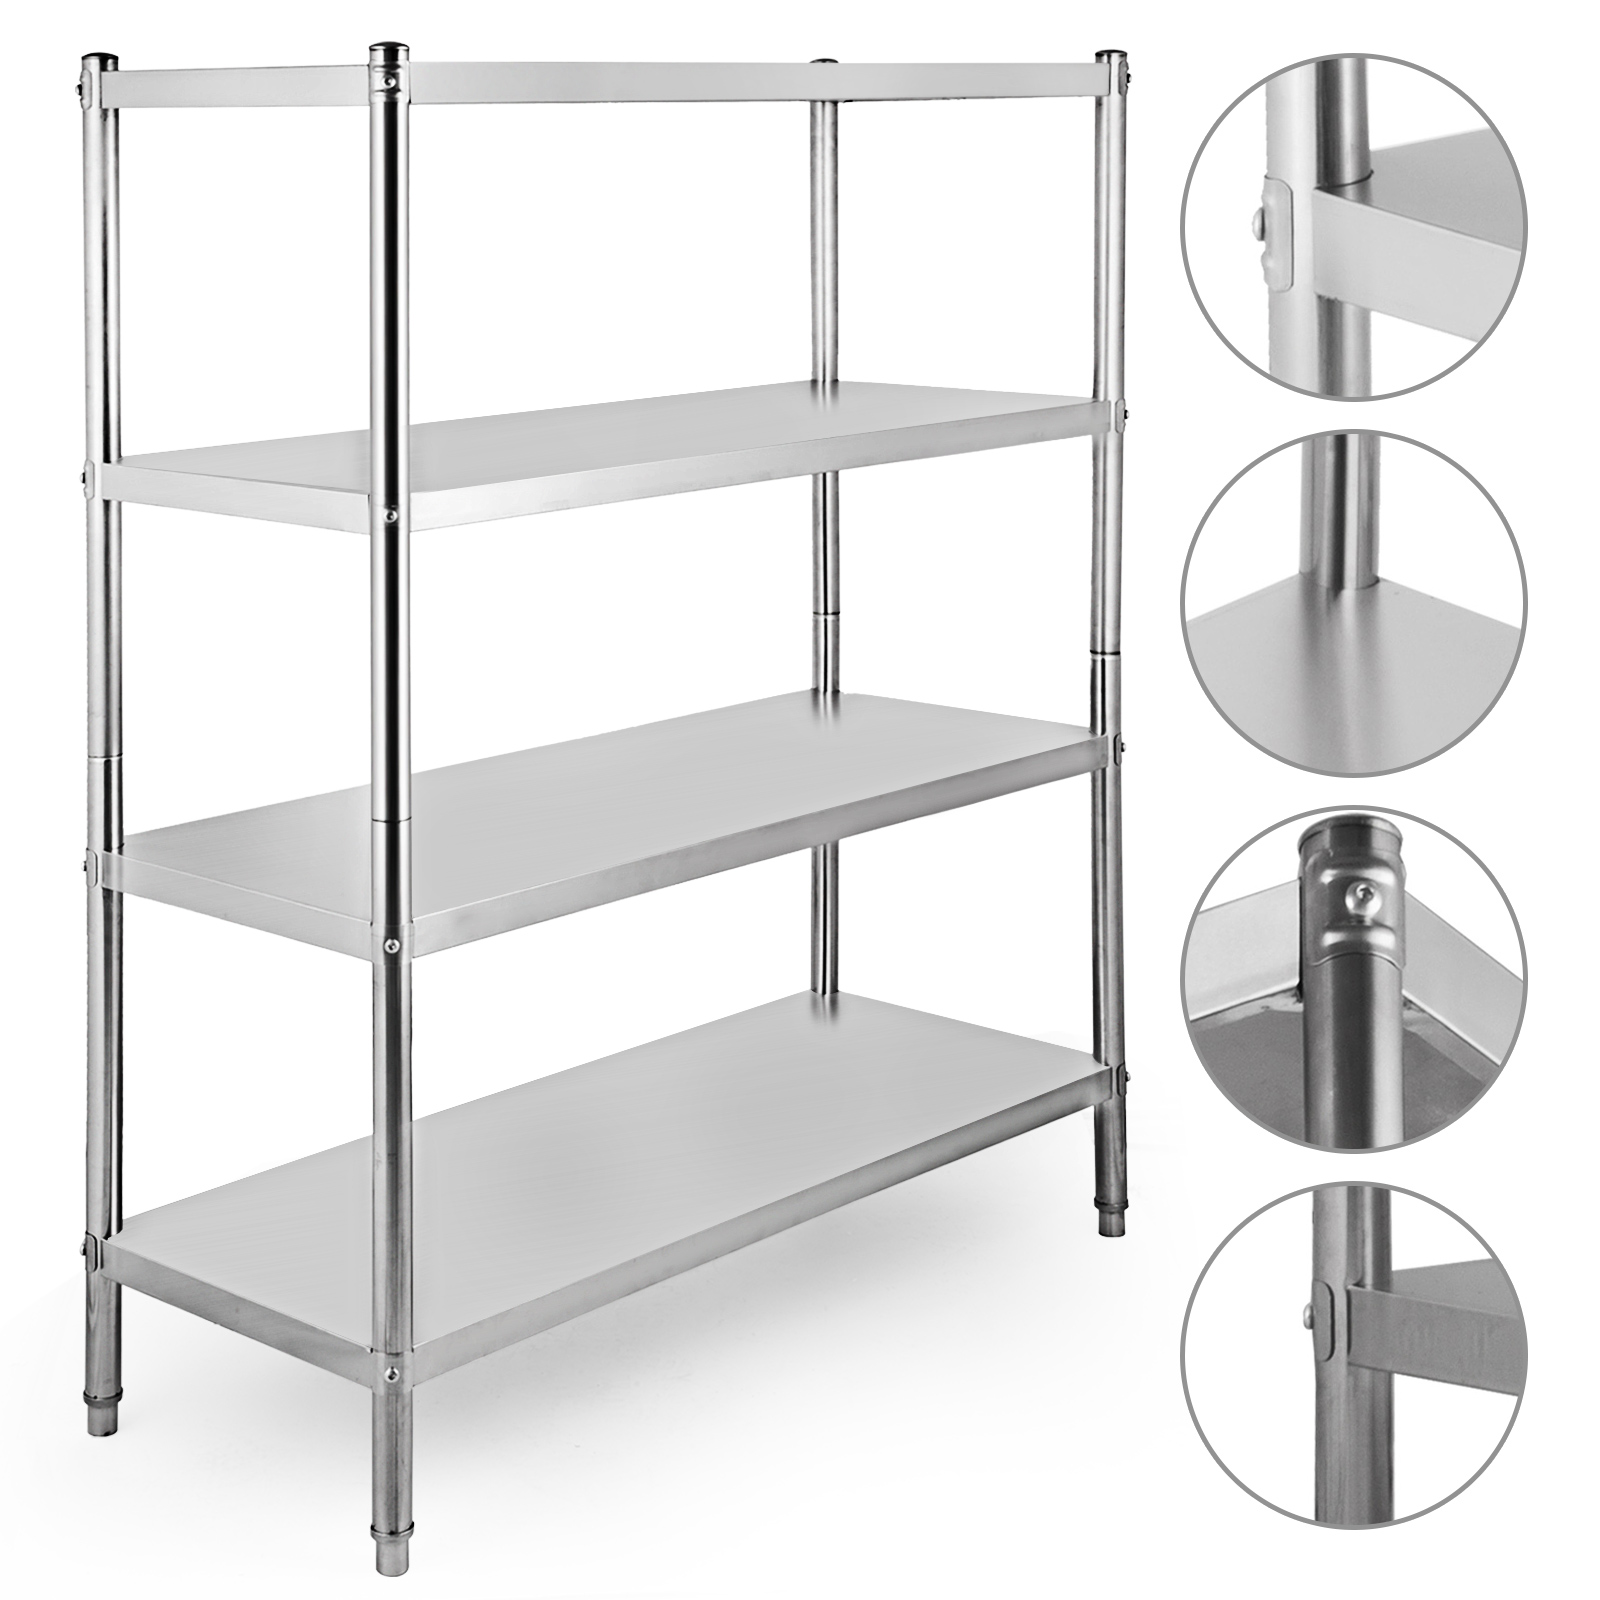 Stainless Steel Shelving Units Storage Shelf 4 Tier Kitchen Commercial Stainless Steel Kitchen Shelving Unit